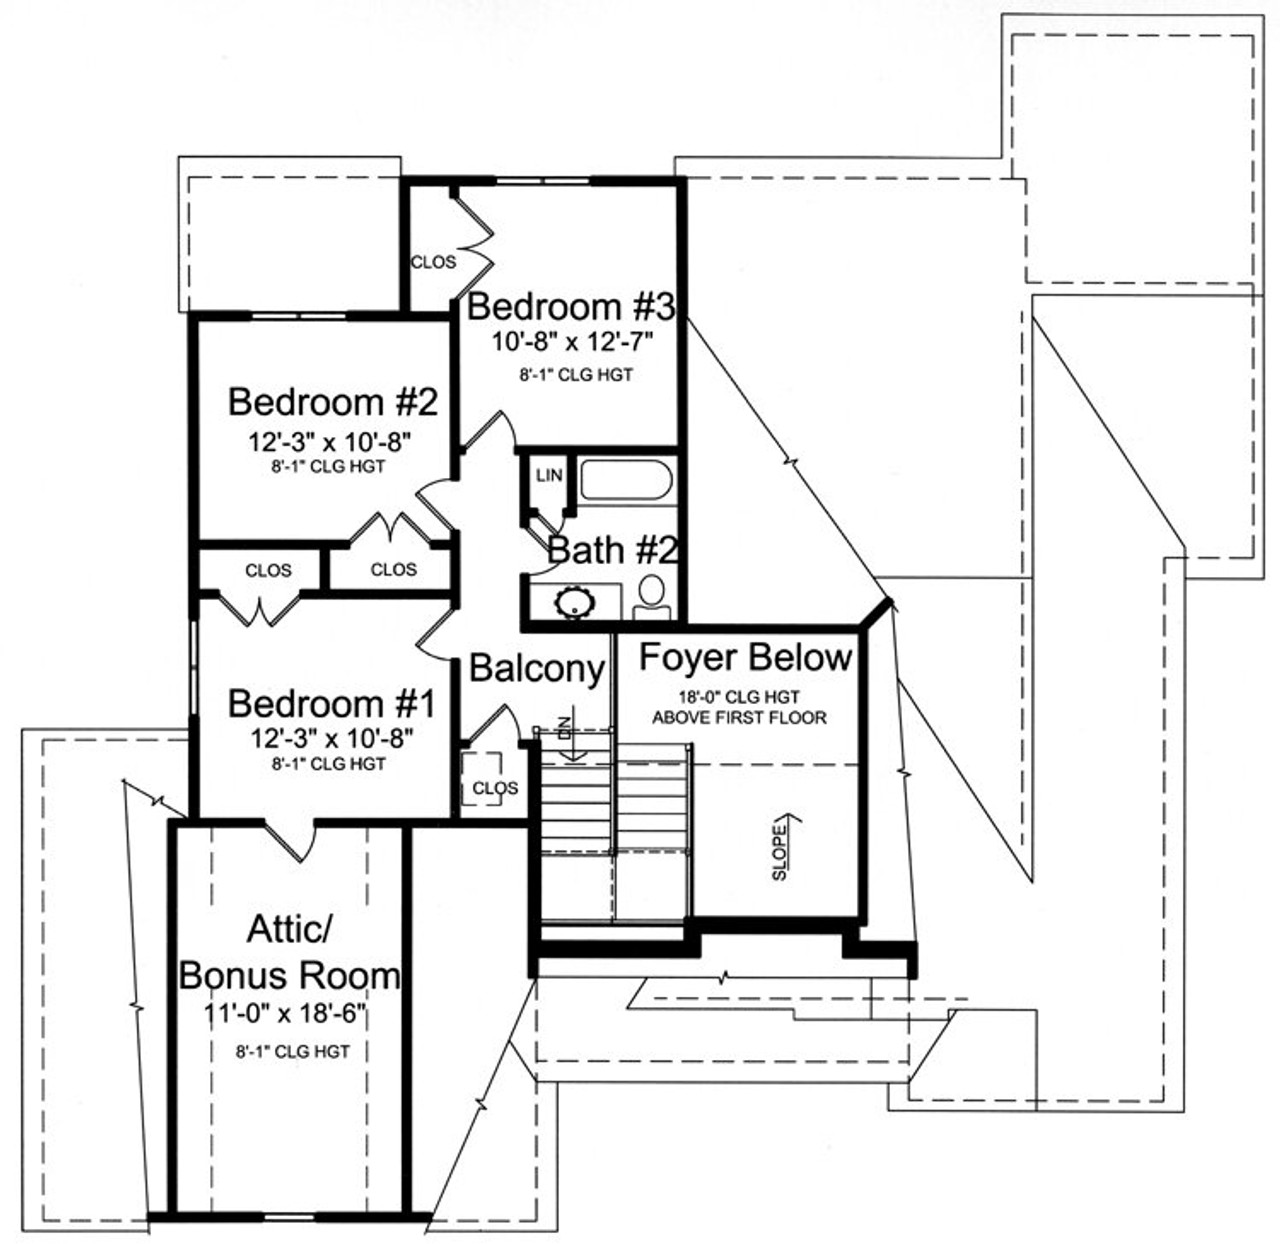 Secondary Image - Craftsman House Plan - The Newfield 67185 - 2nd Floor Plan